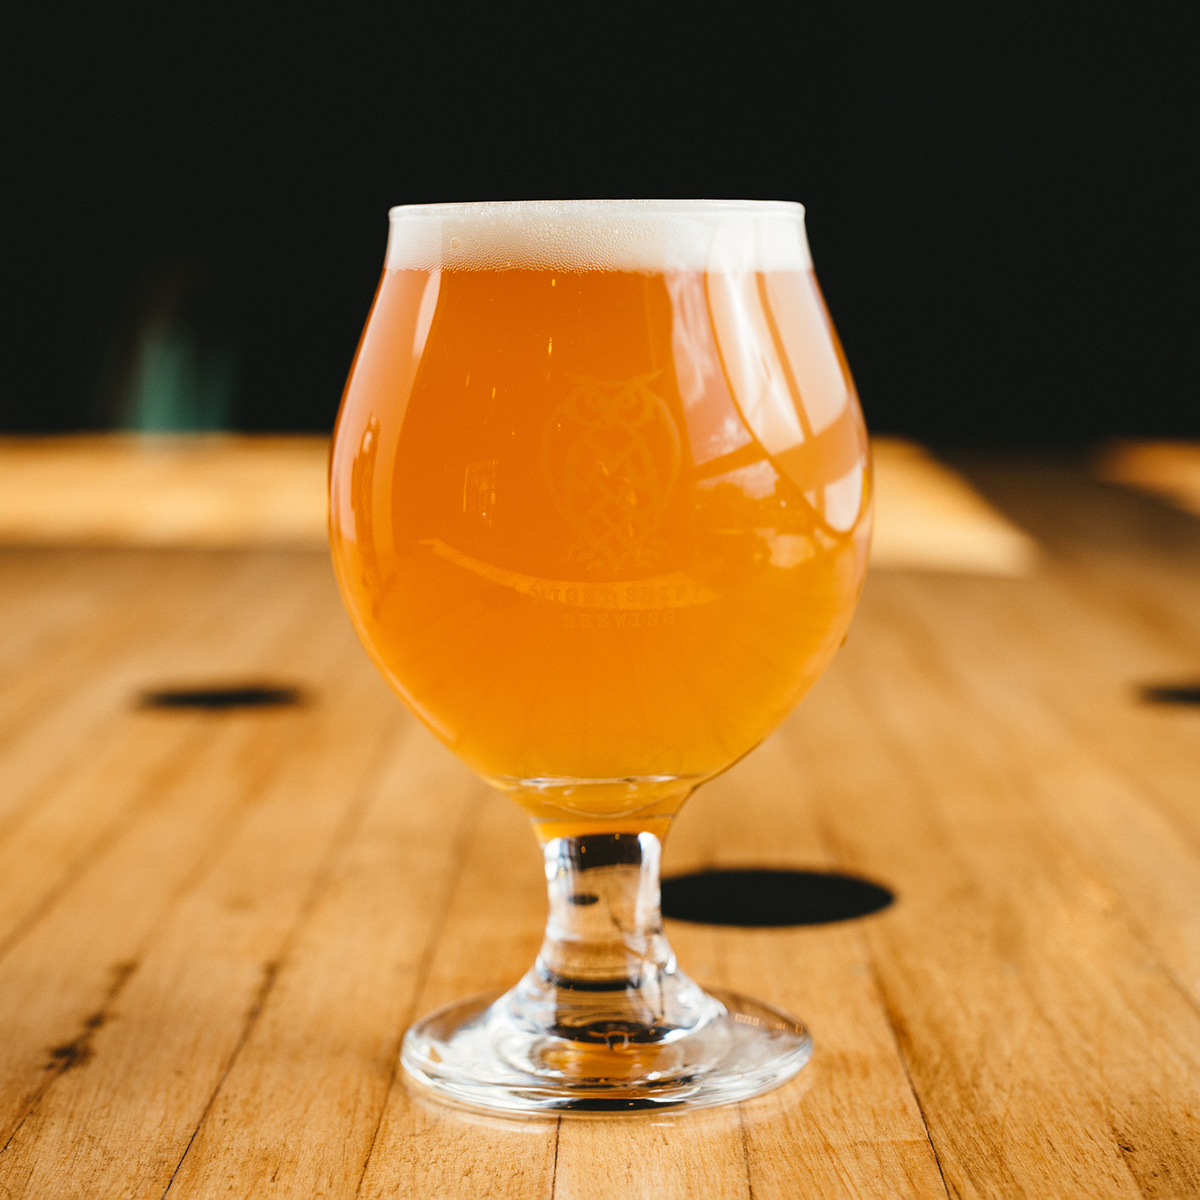 XLV, the newest presidential double IPA from Night Shift Brewing. / Photo by Tim Oxton